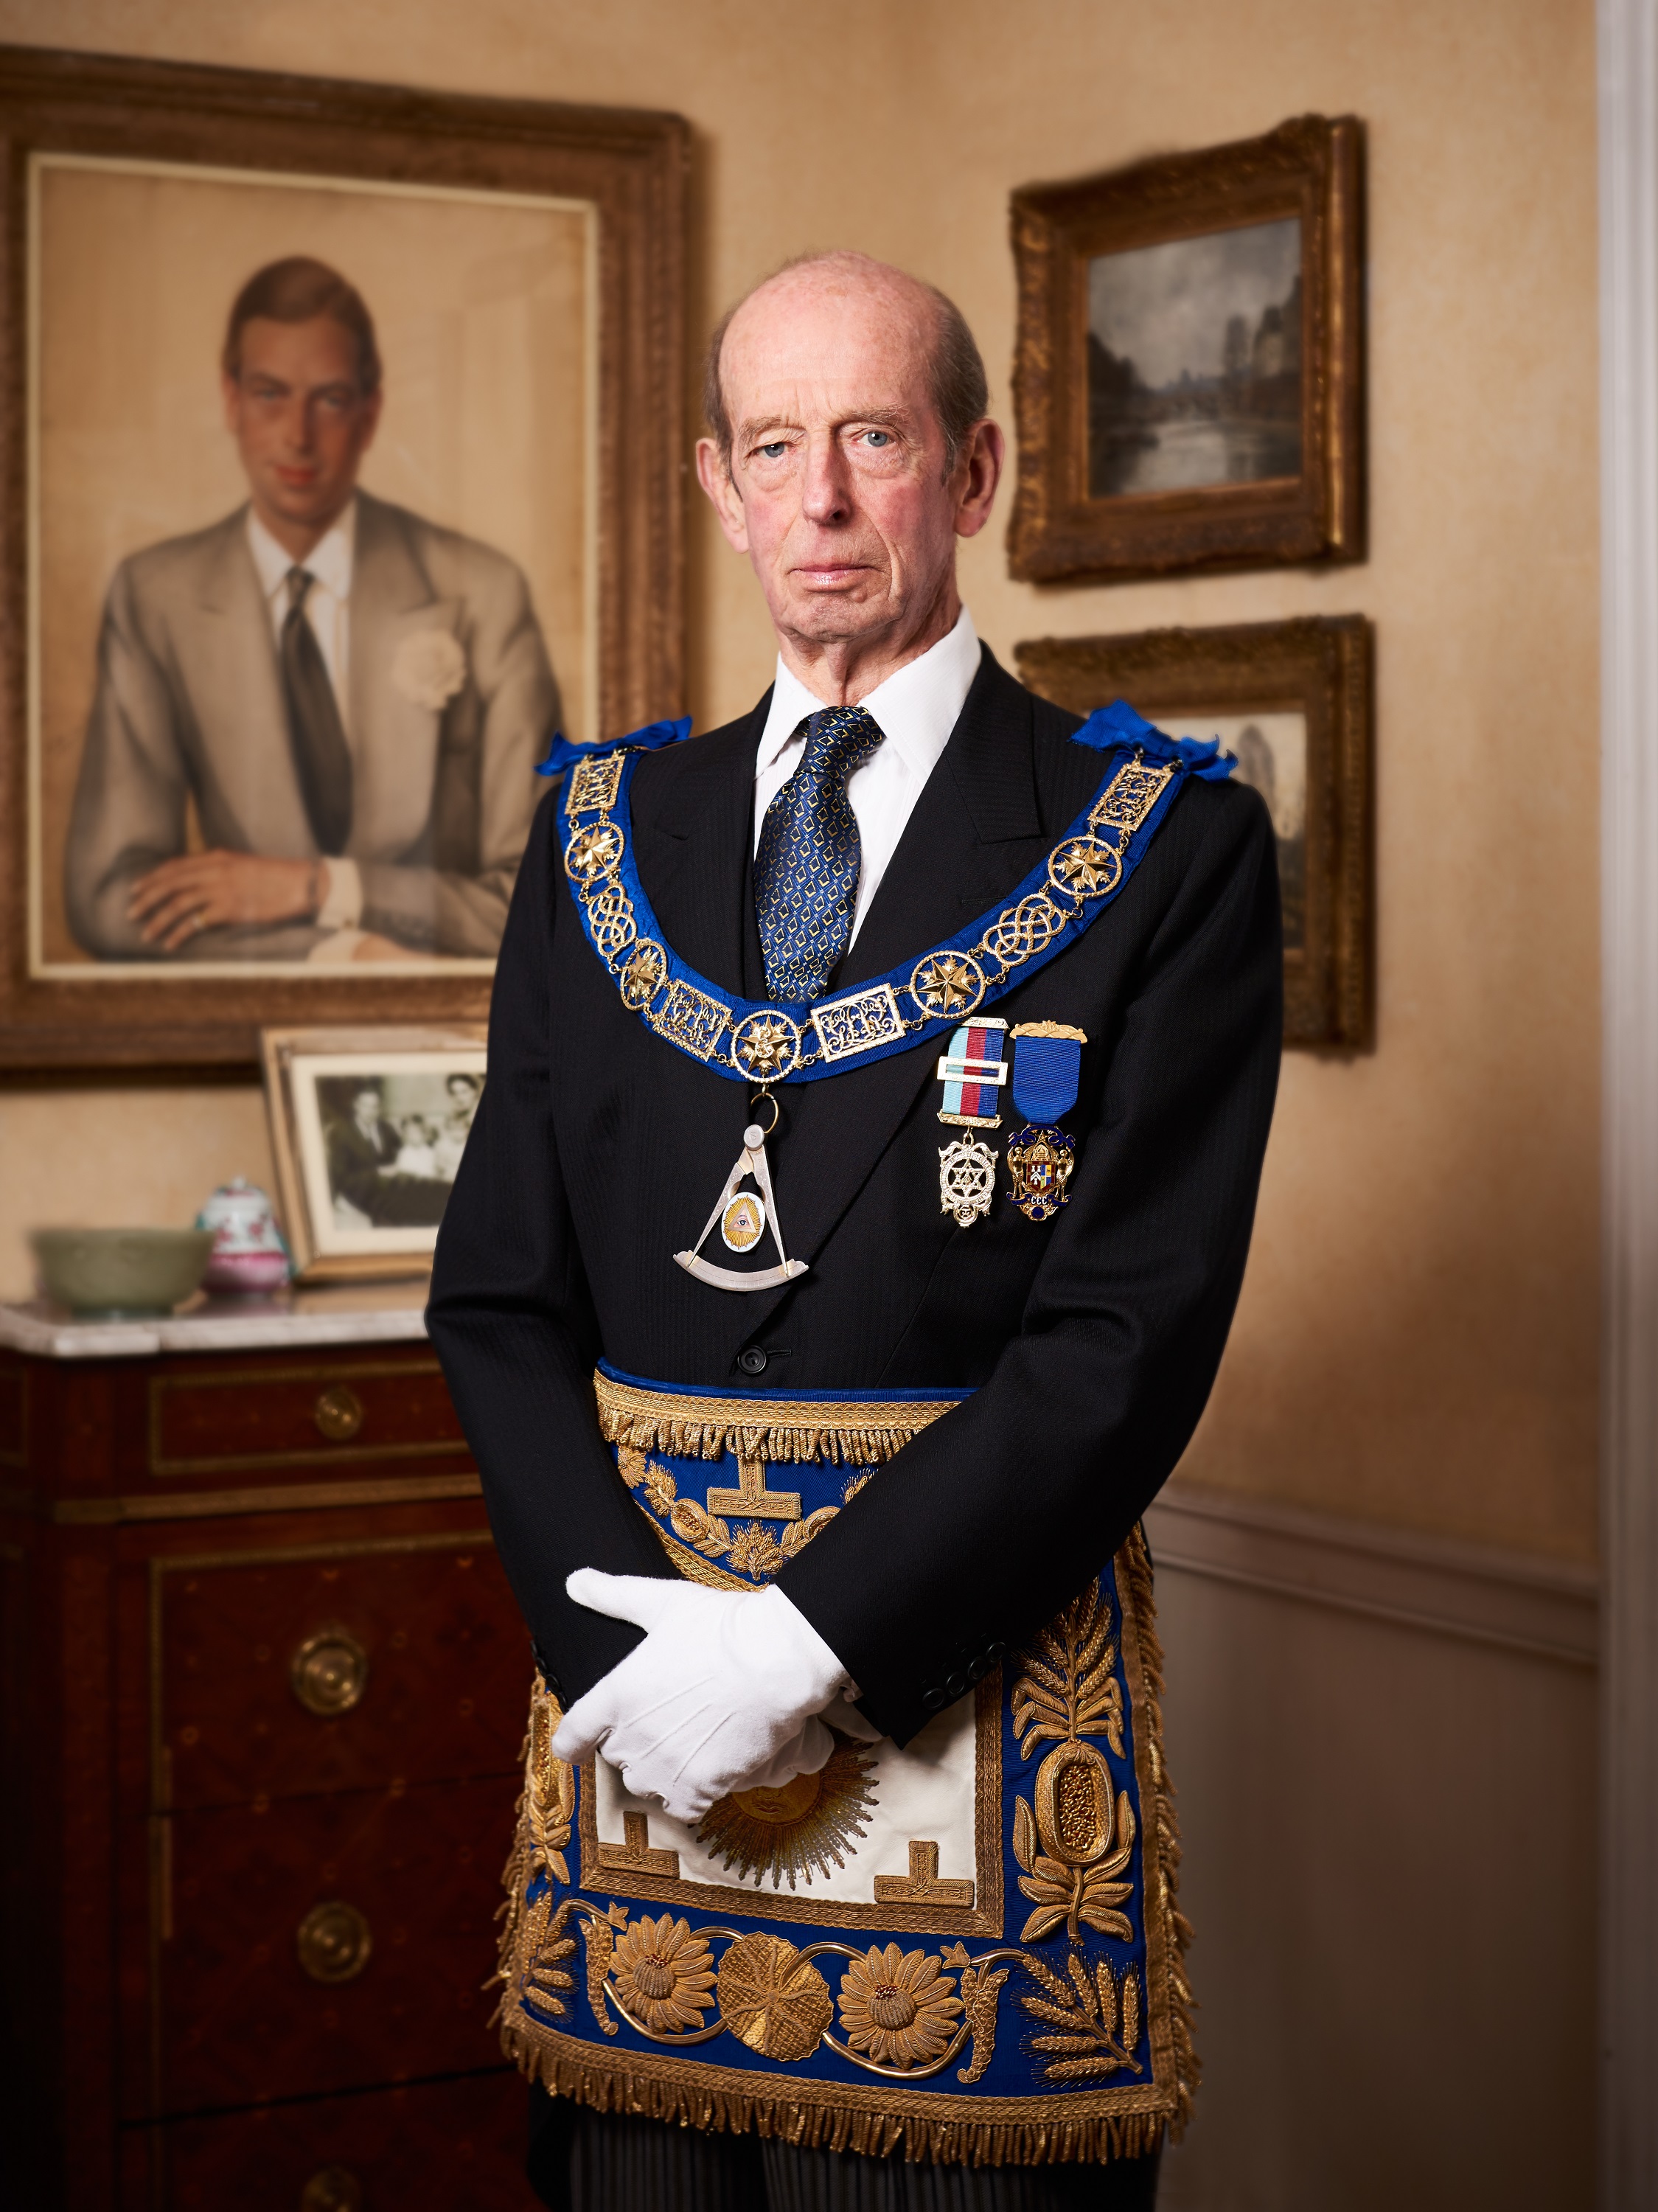 HRH The Duke of Kent, dressed in his Masonic regalia indicating his rank as the Grand Master